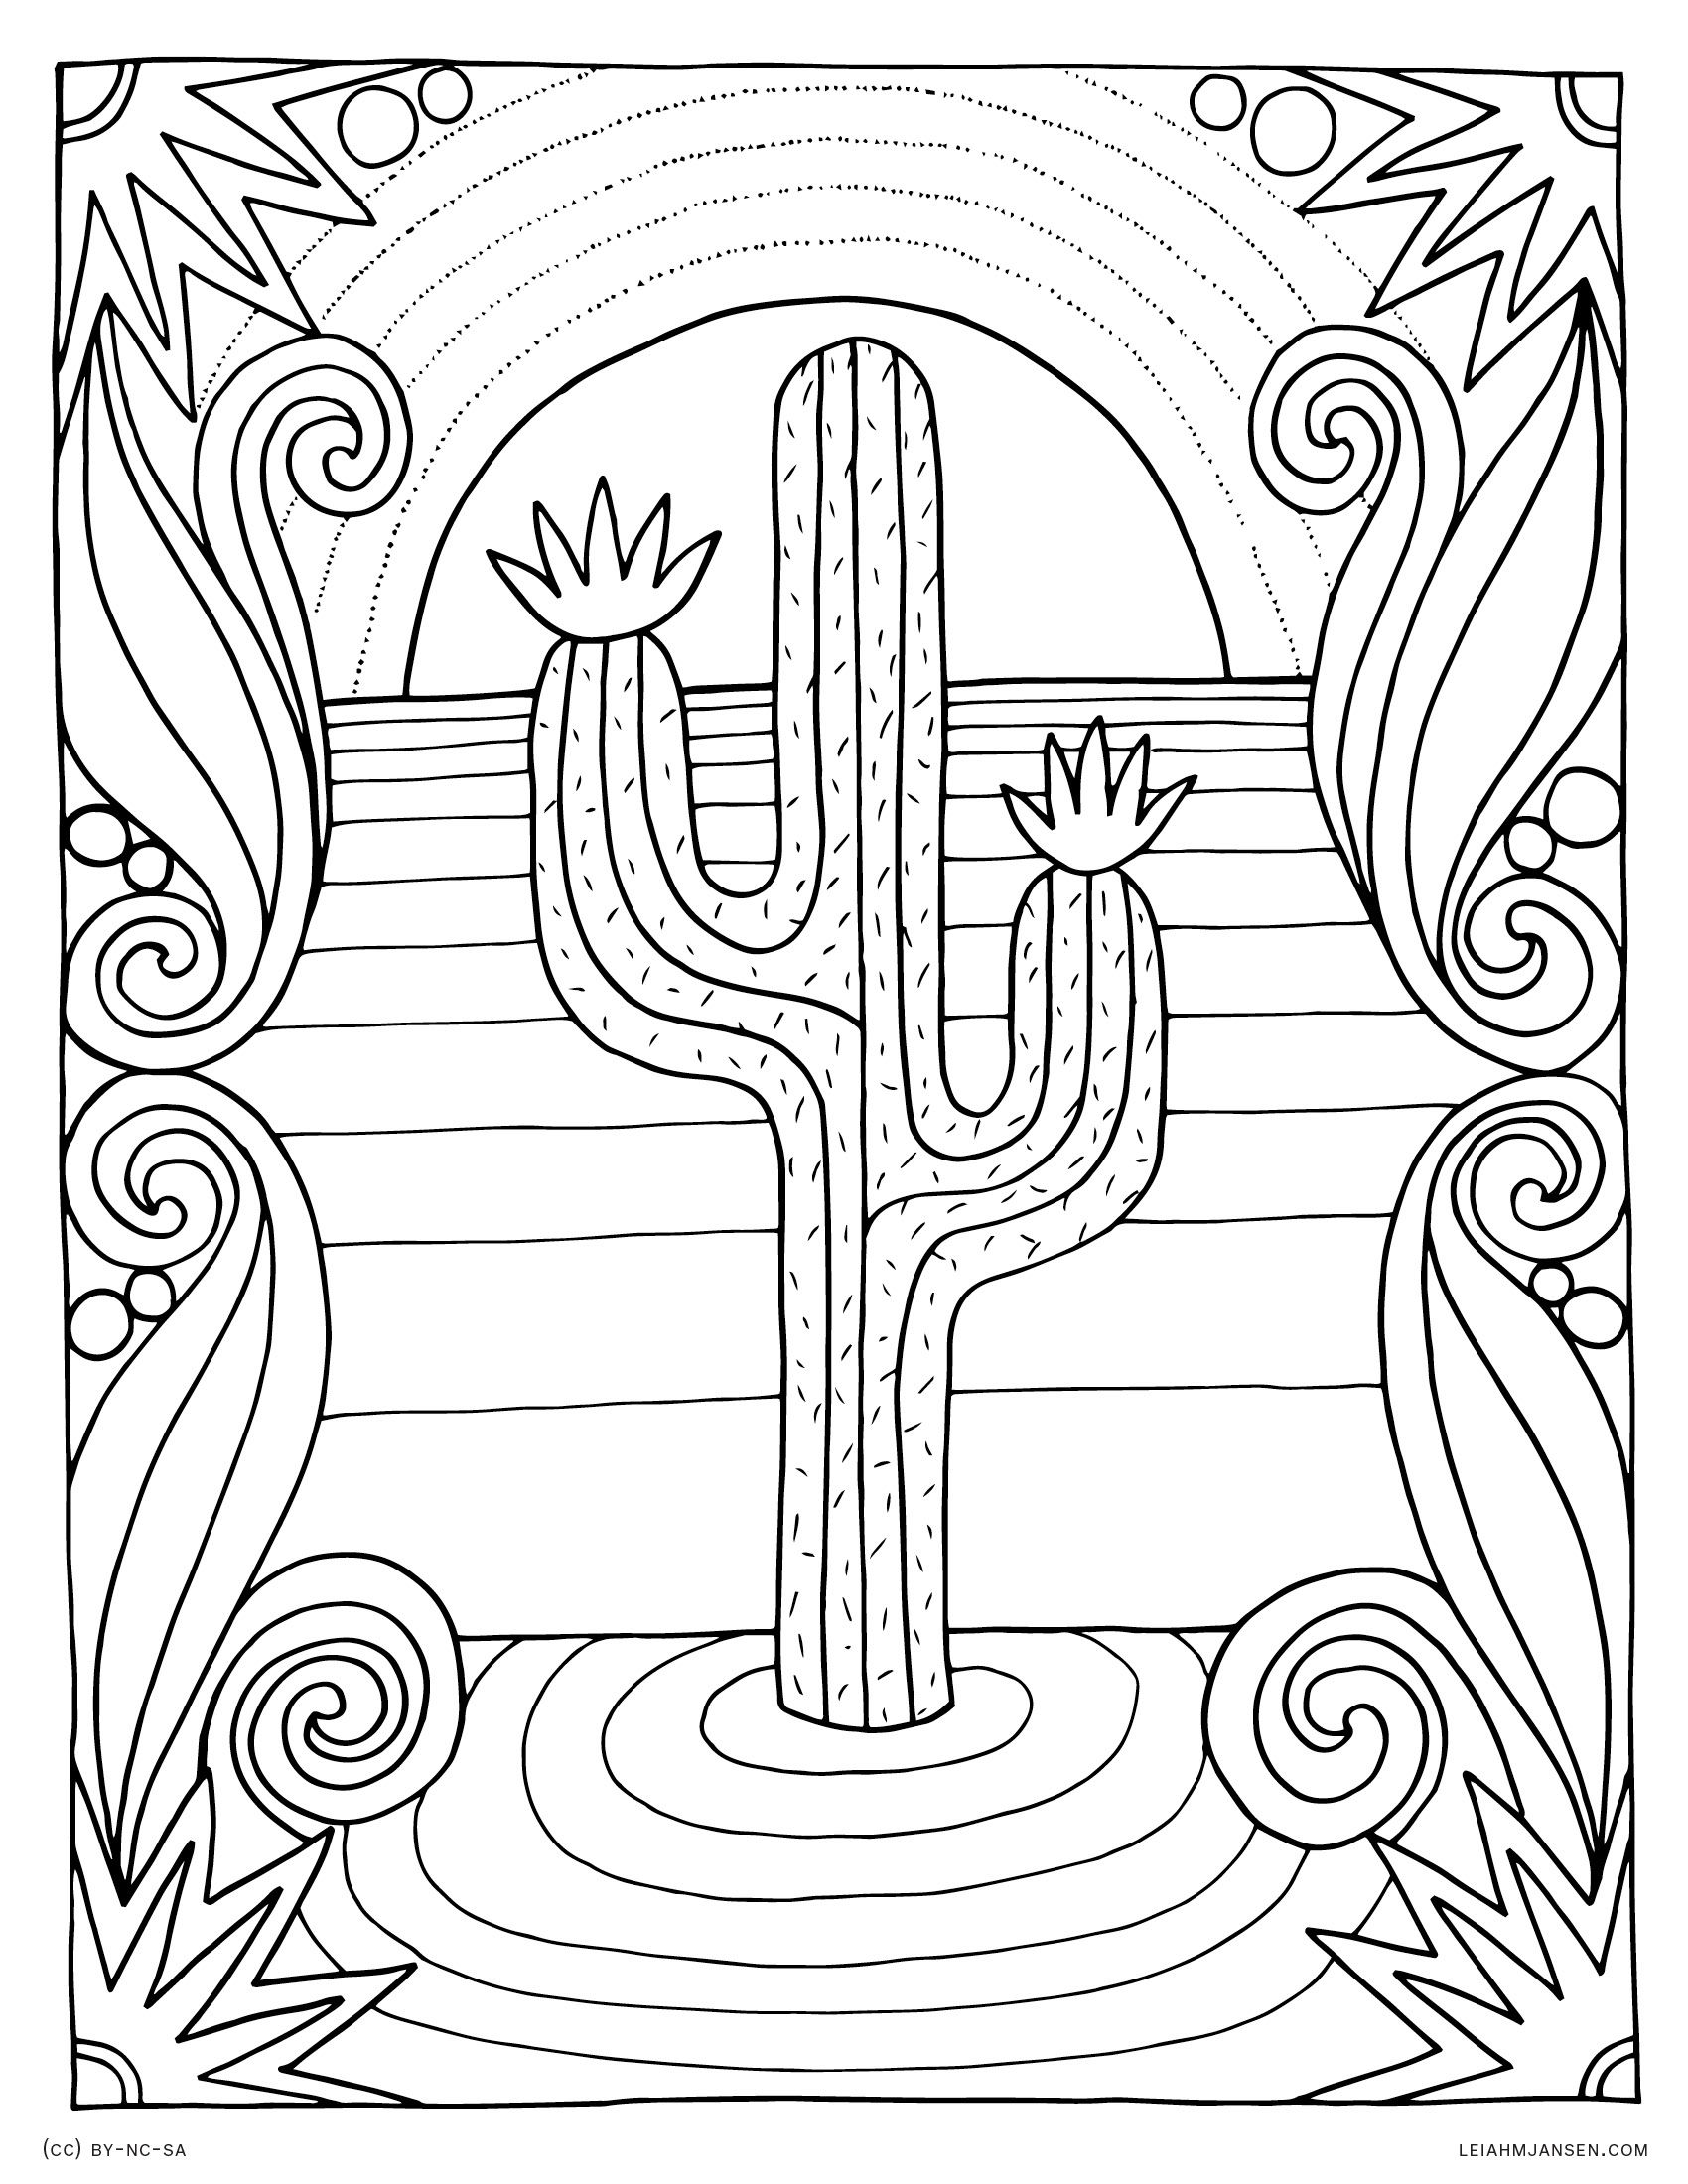 Coloring Pages : Coloring Pages Sunset Printable Landscape ...